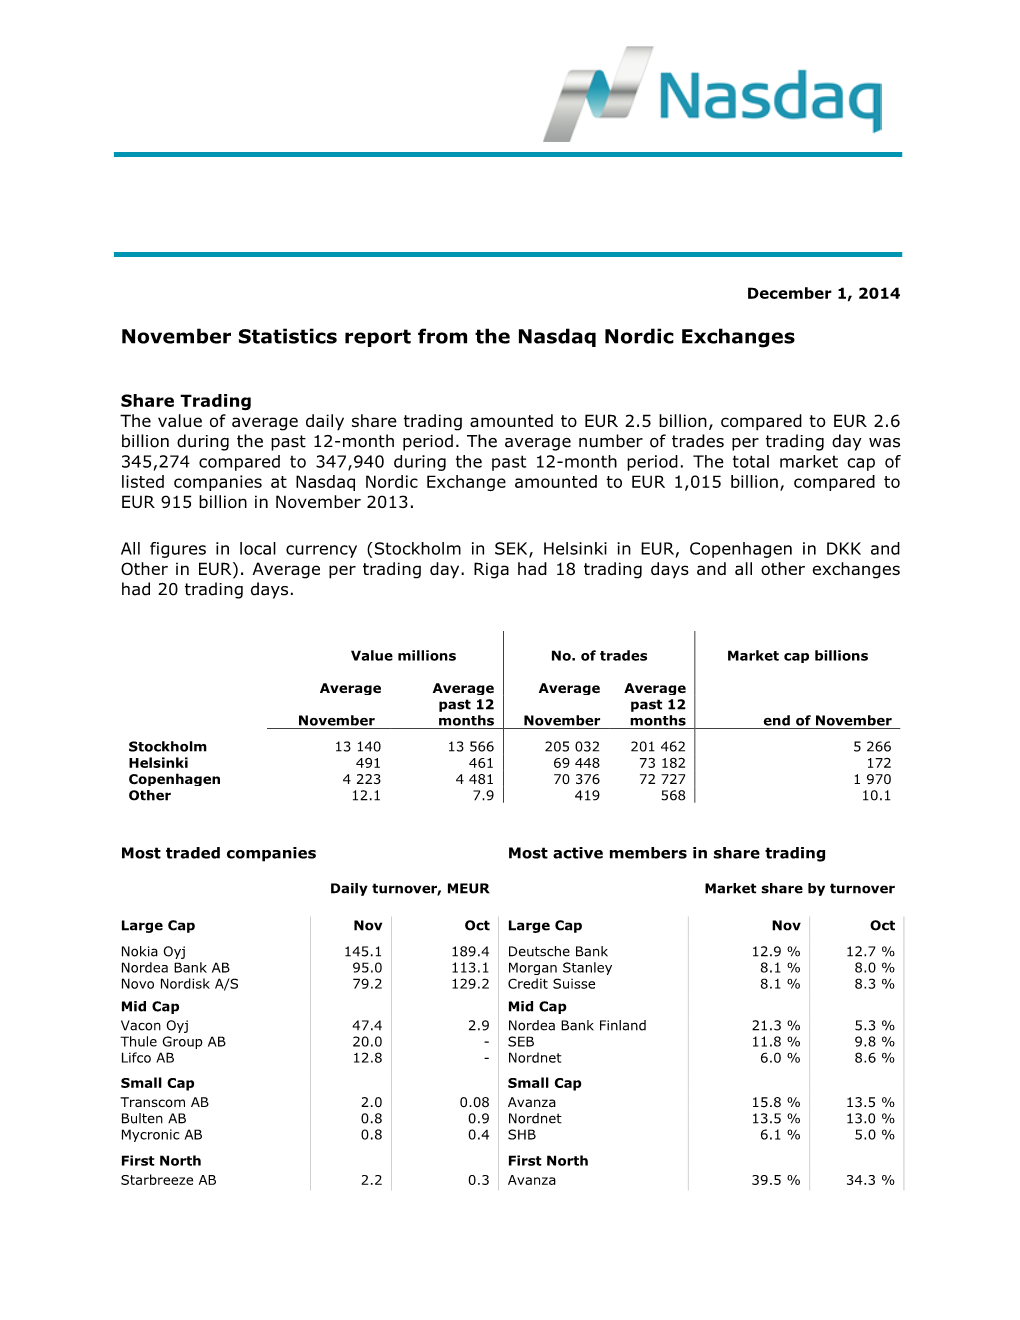 May 2010 Statistics Report from the NASDAQ OMX Nordic Exchanges